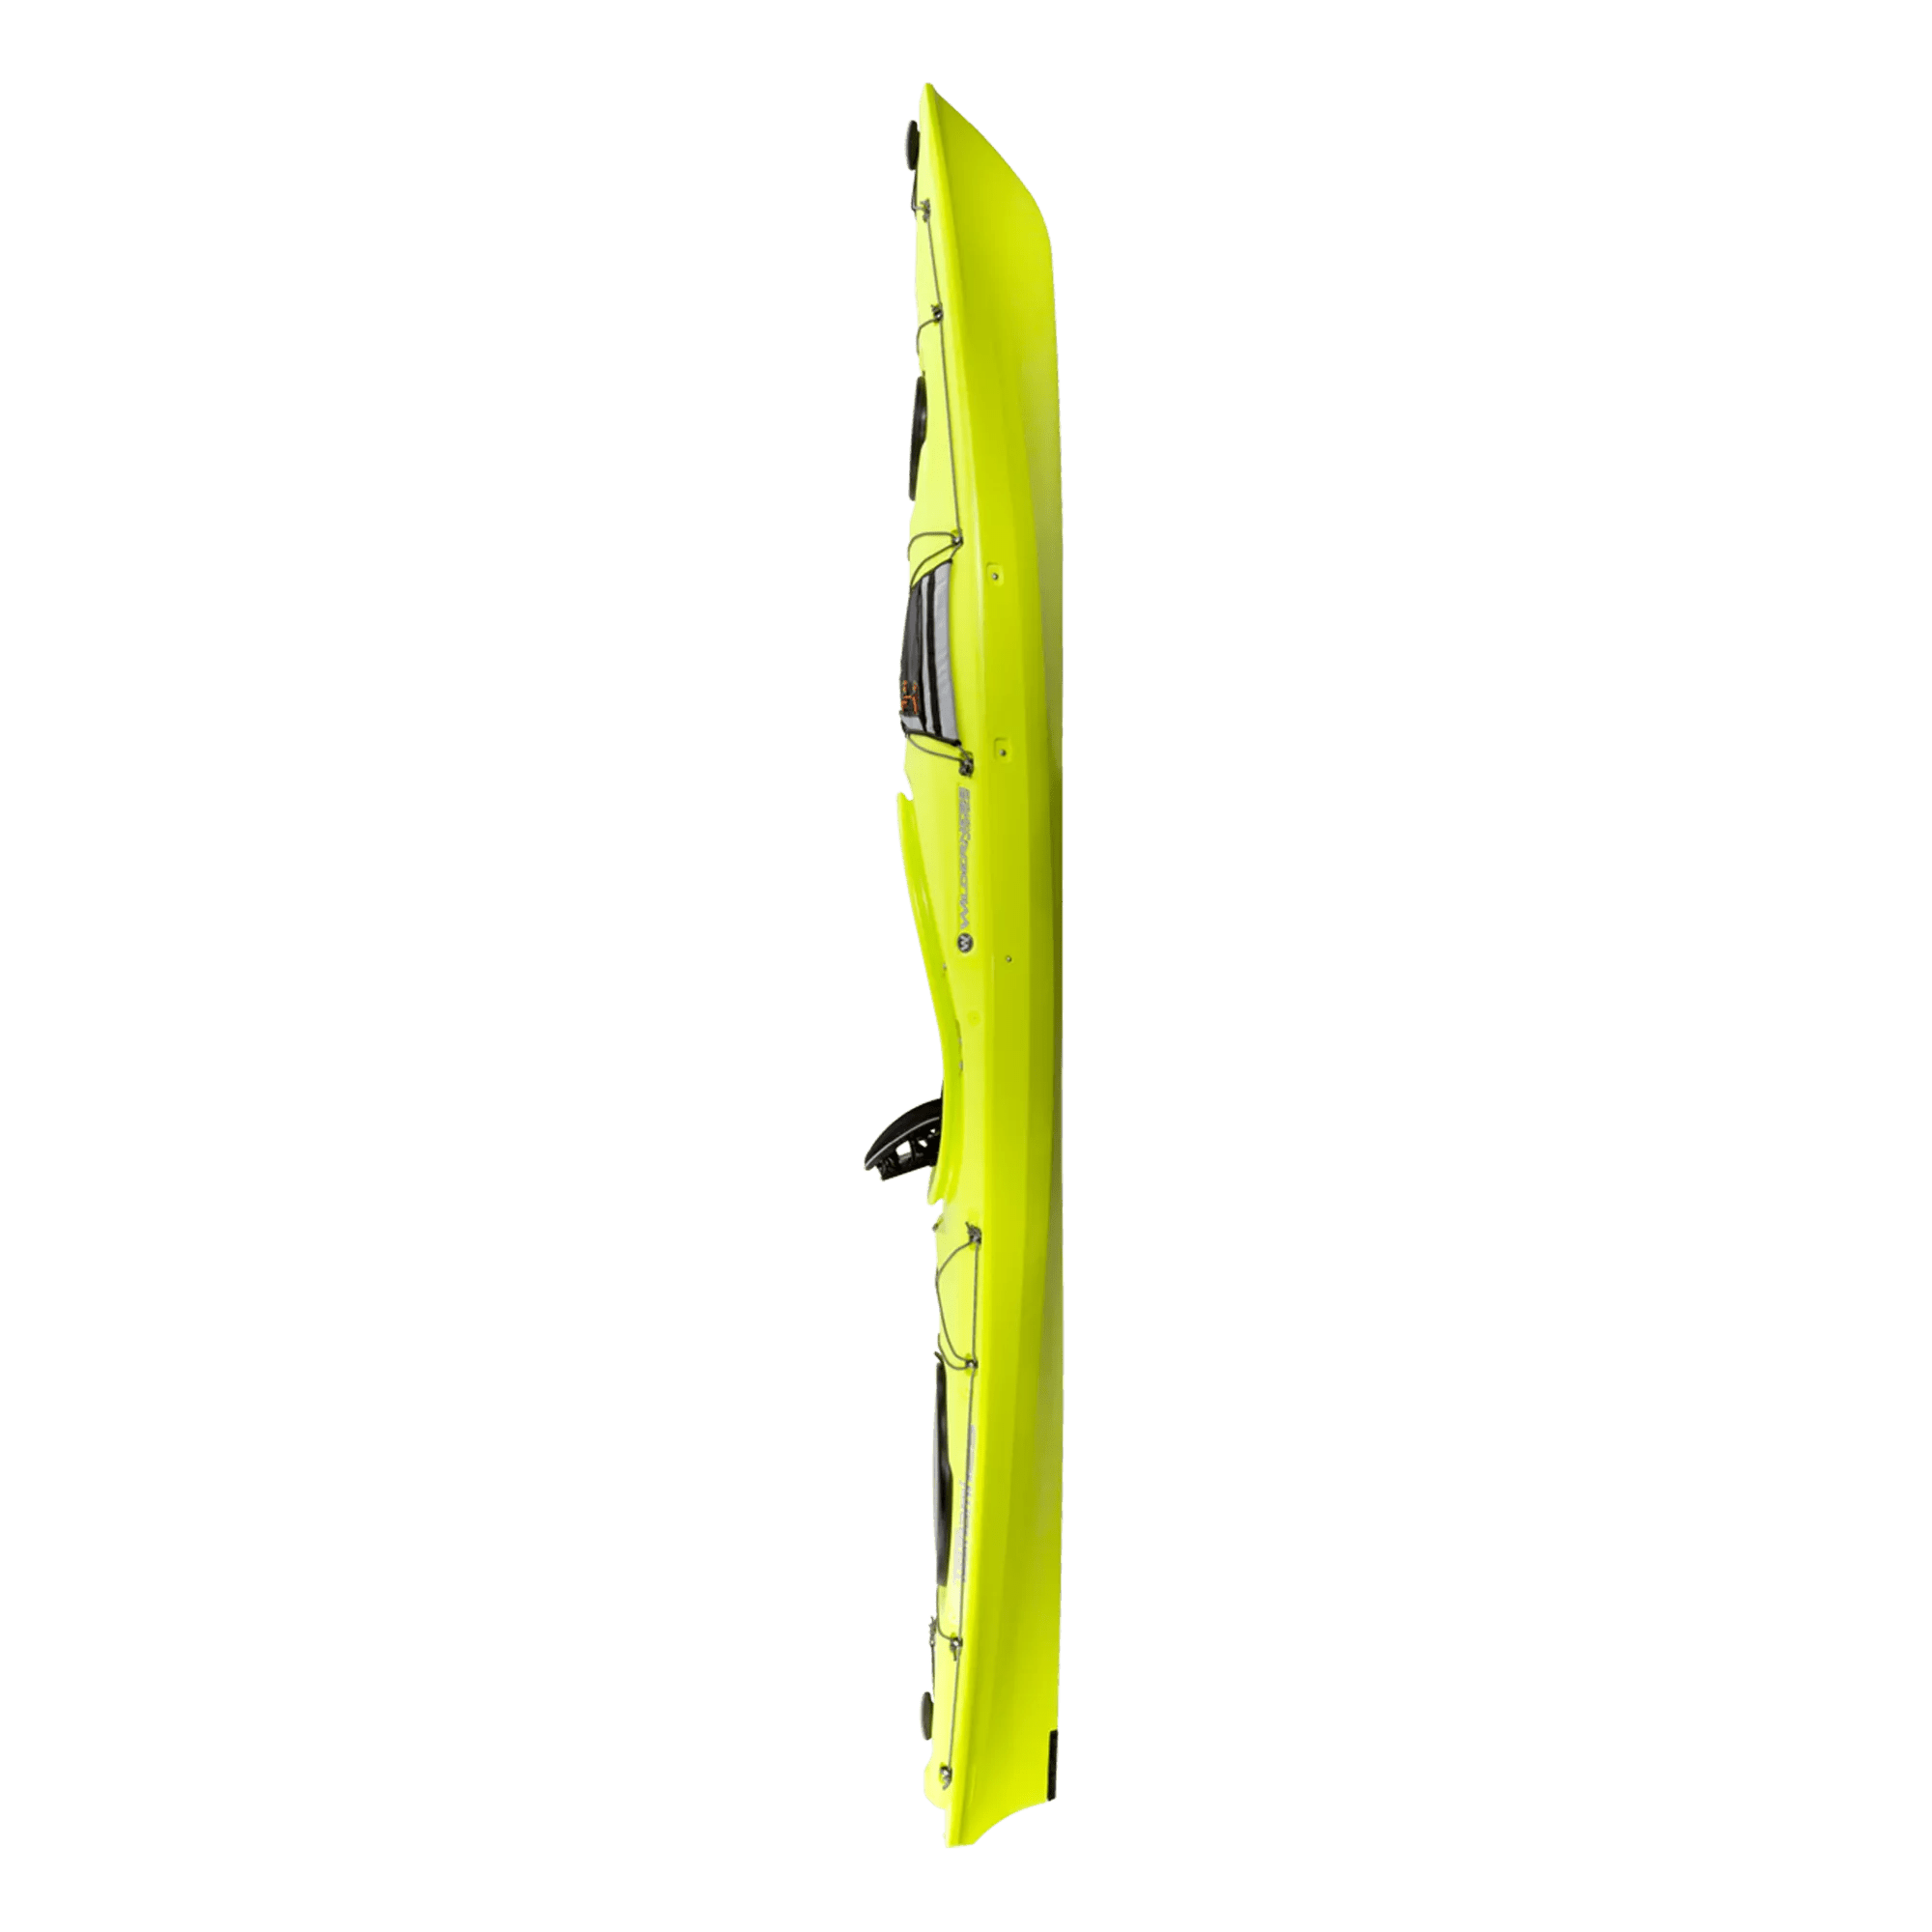 WILDERNESS SYSTEMS - Tsunami 125 Day Touring Kayak - Discontinued color/model - Yellow - 9720258180 - SIDE